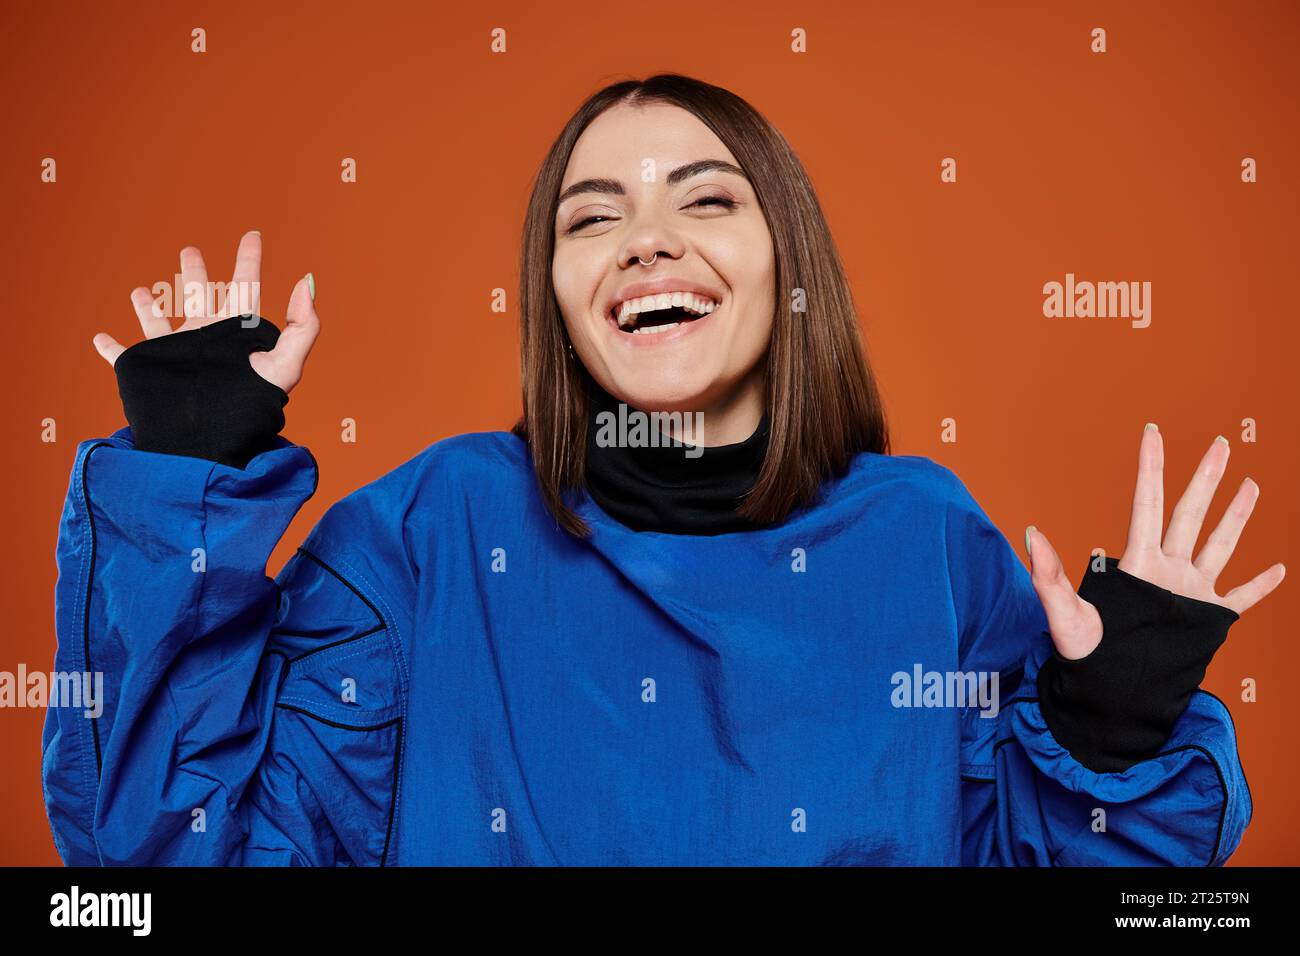 excited young woman with pierced nose looking at camera and smiling on orange backdrop, blue jacket Stock Photo